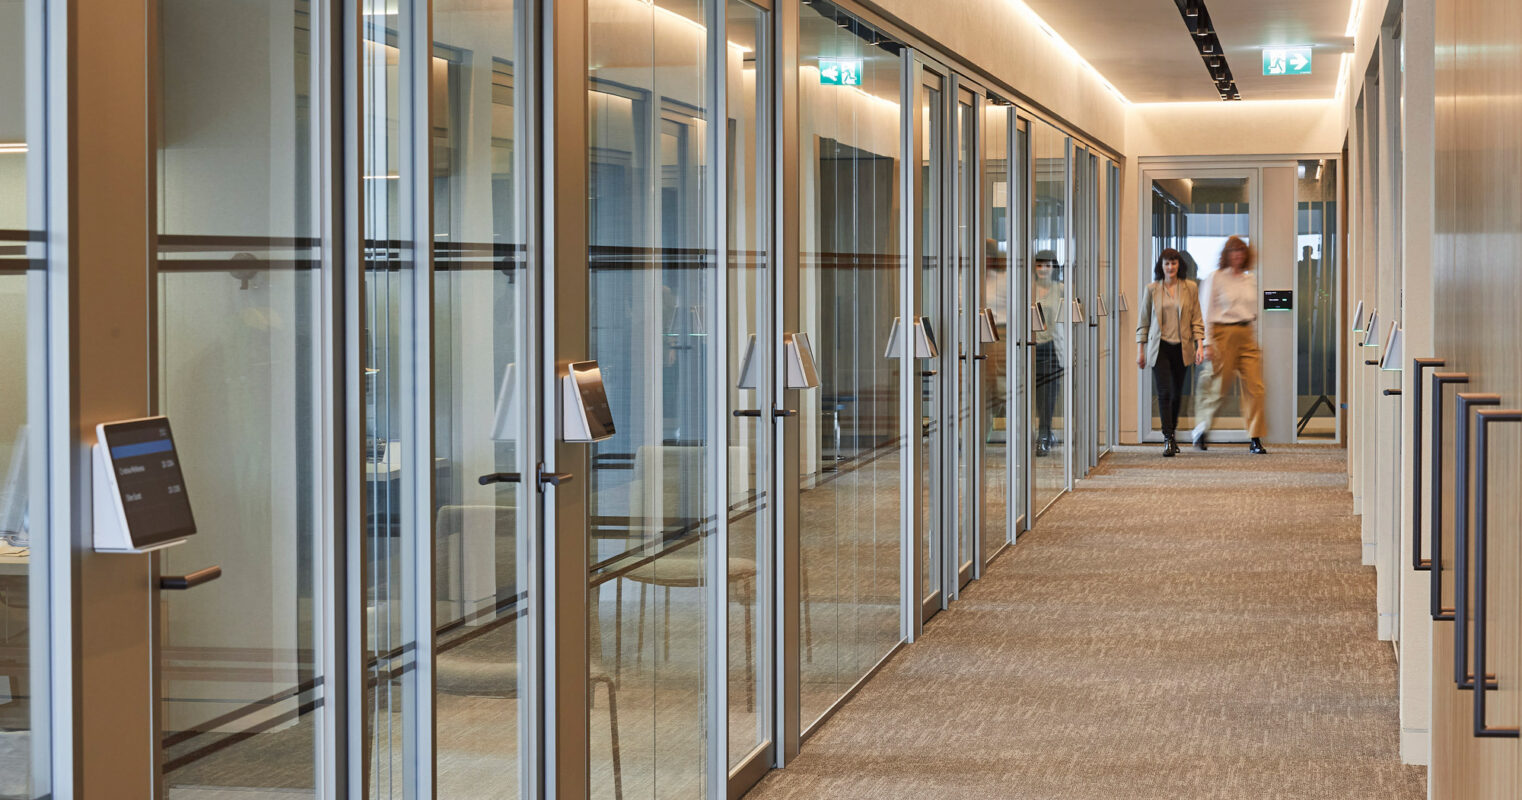 Modern office corridor featuring full-height glass partition walls, warm LED lighting, and sleek brushed metal door handles. A textured neutral carpet complements the minimalist design, enhancing the professional setting with people in motion, suggesting activity and collaboration.